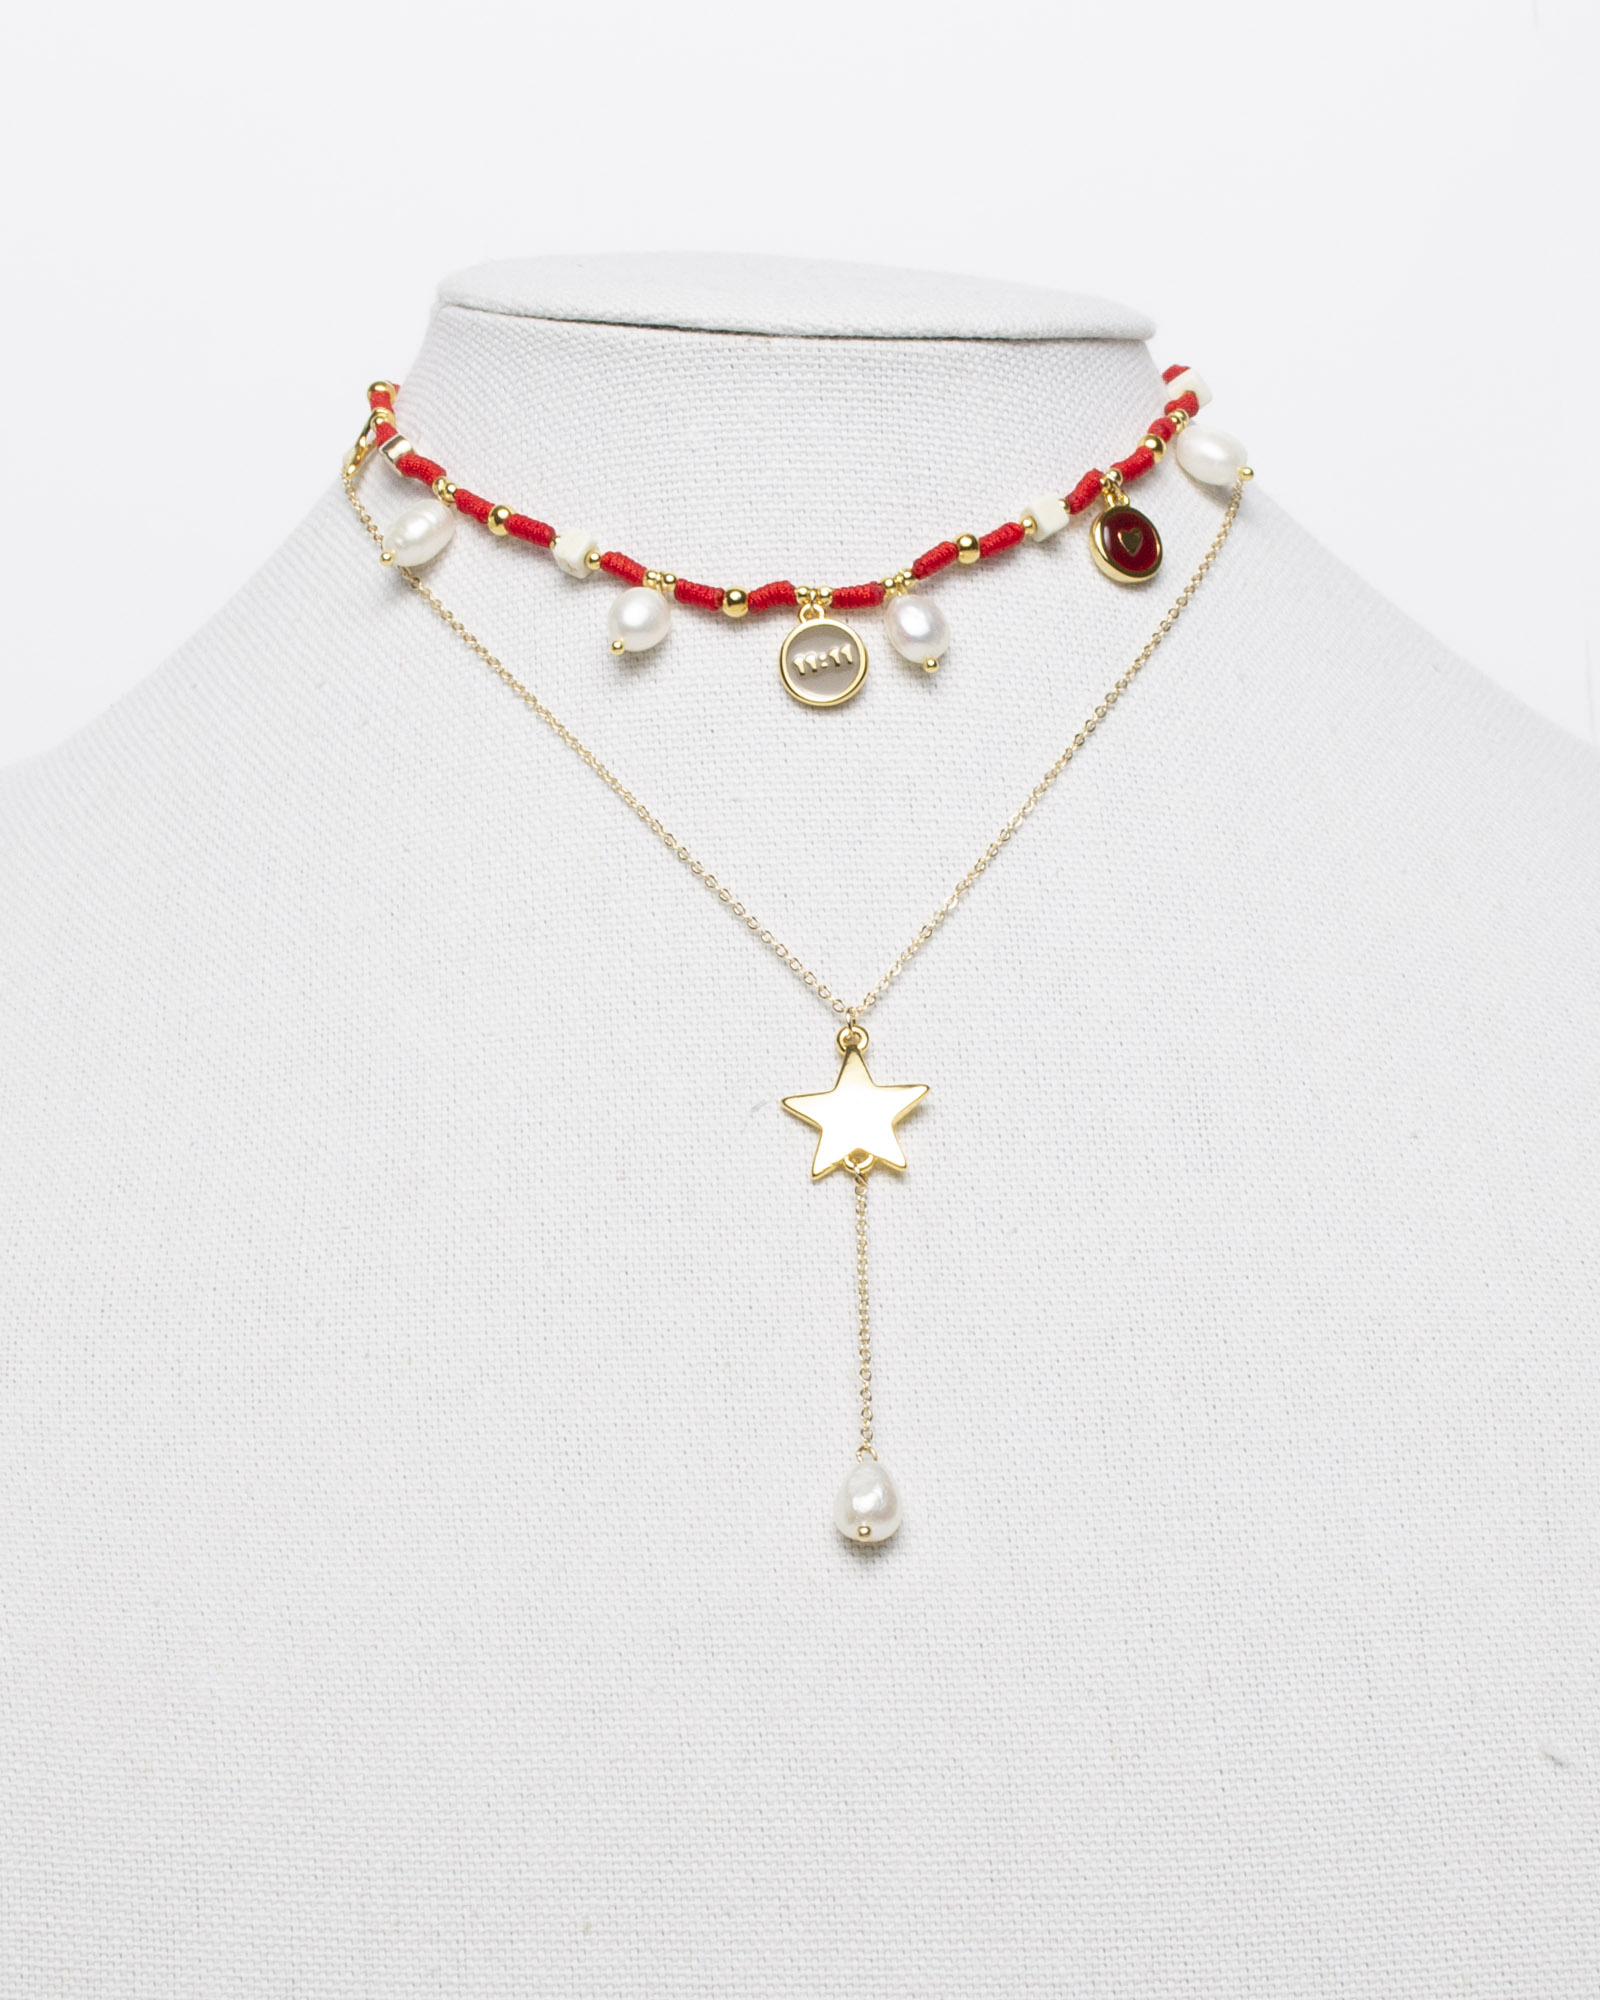 Believe Red Choker and Necklace Set